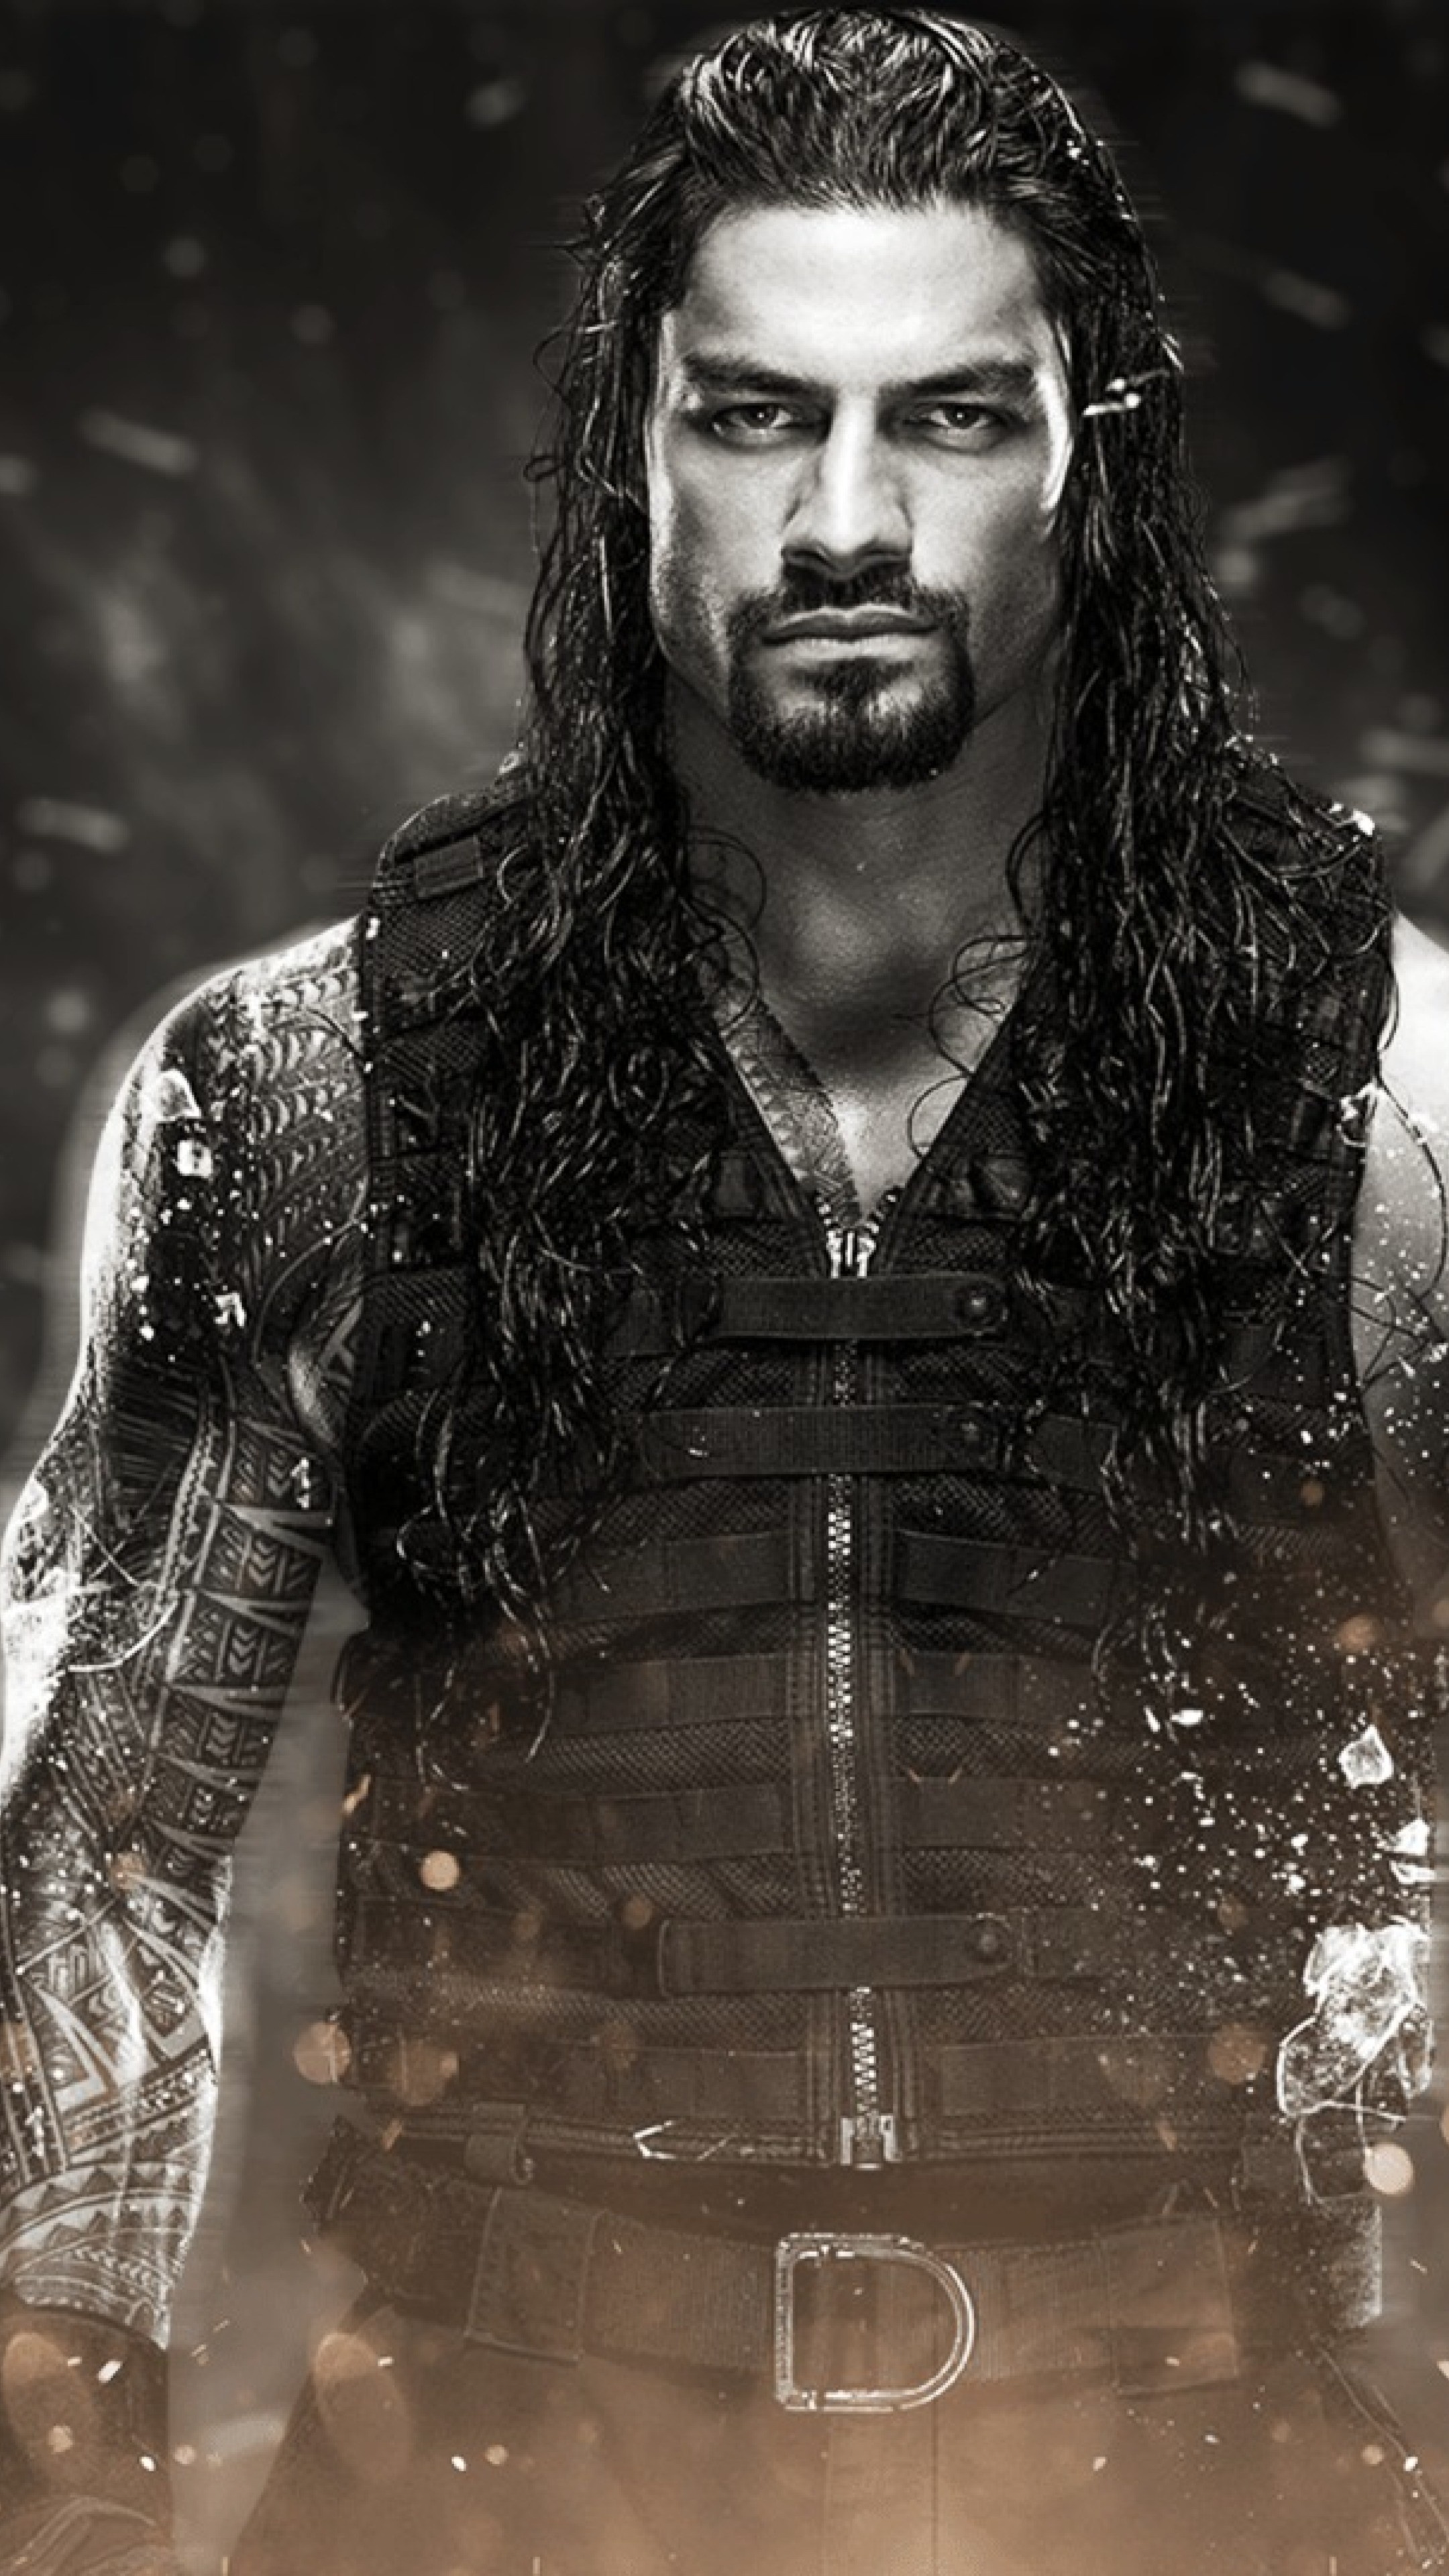 Roman Reigns wallpapers, Reigns' dominance, Powerful presence, Wrestling supremacy, 2160x3840 4K Phone